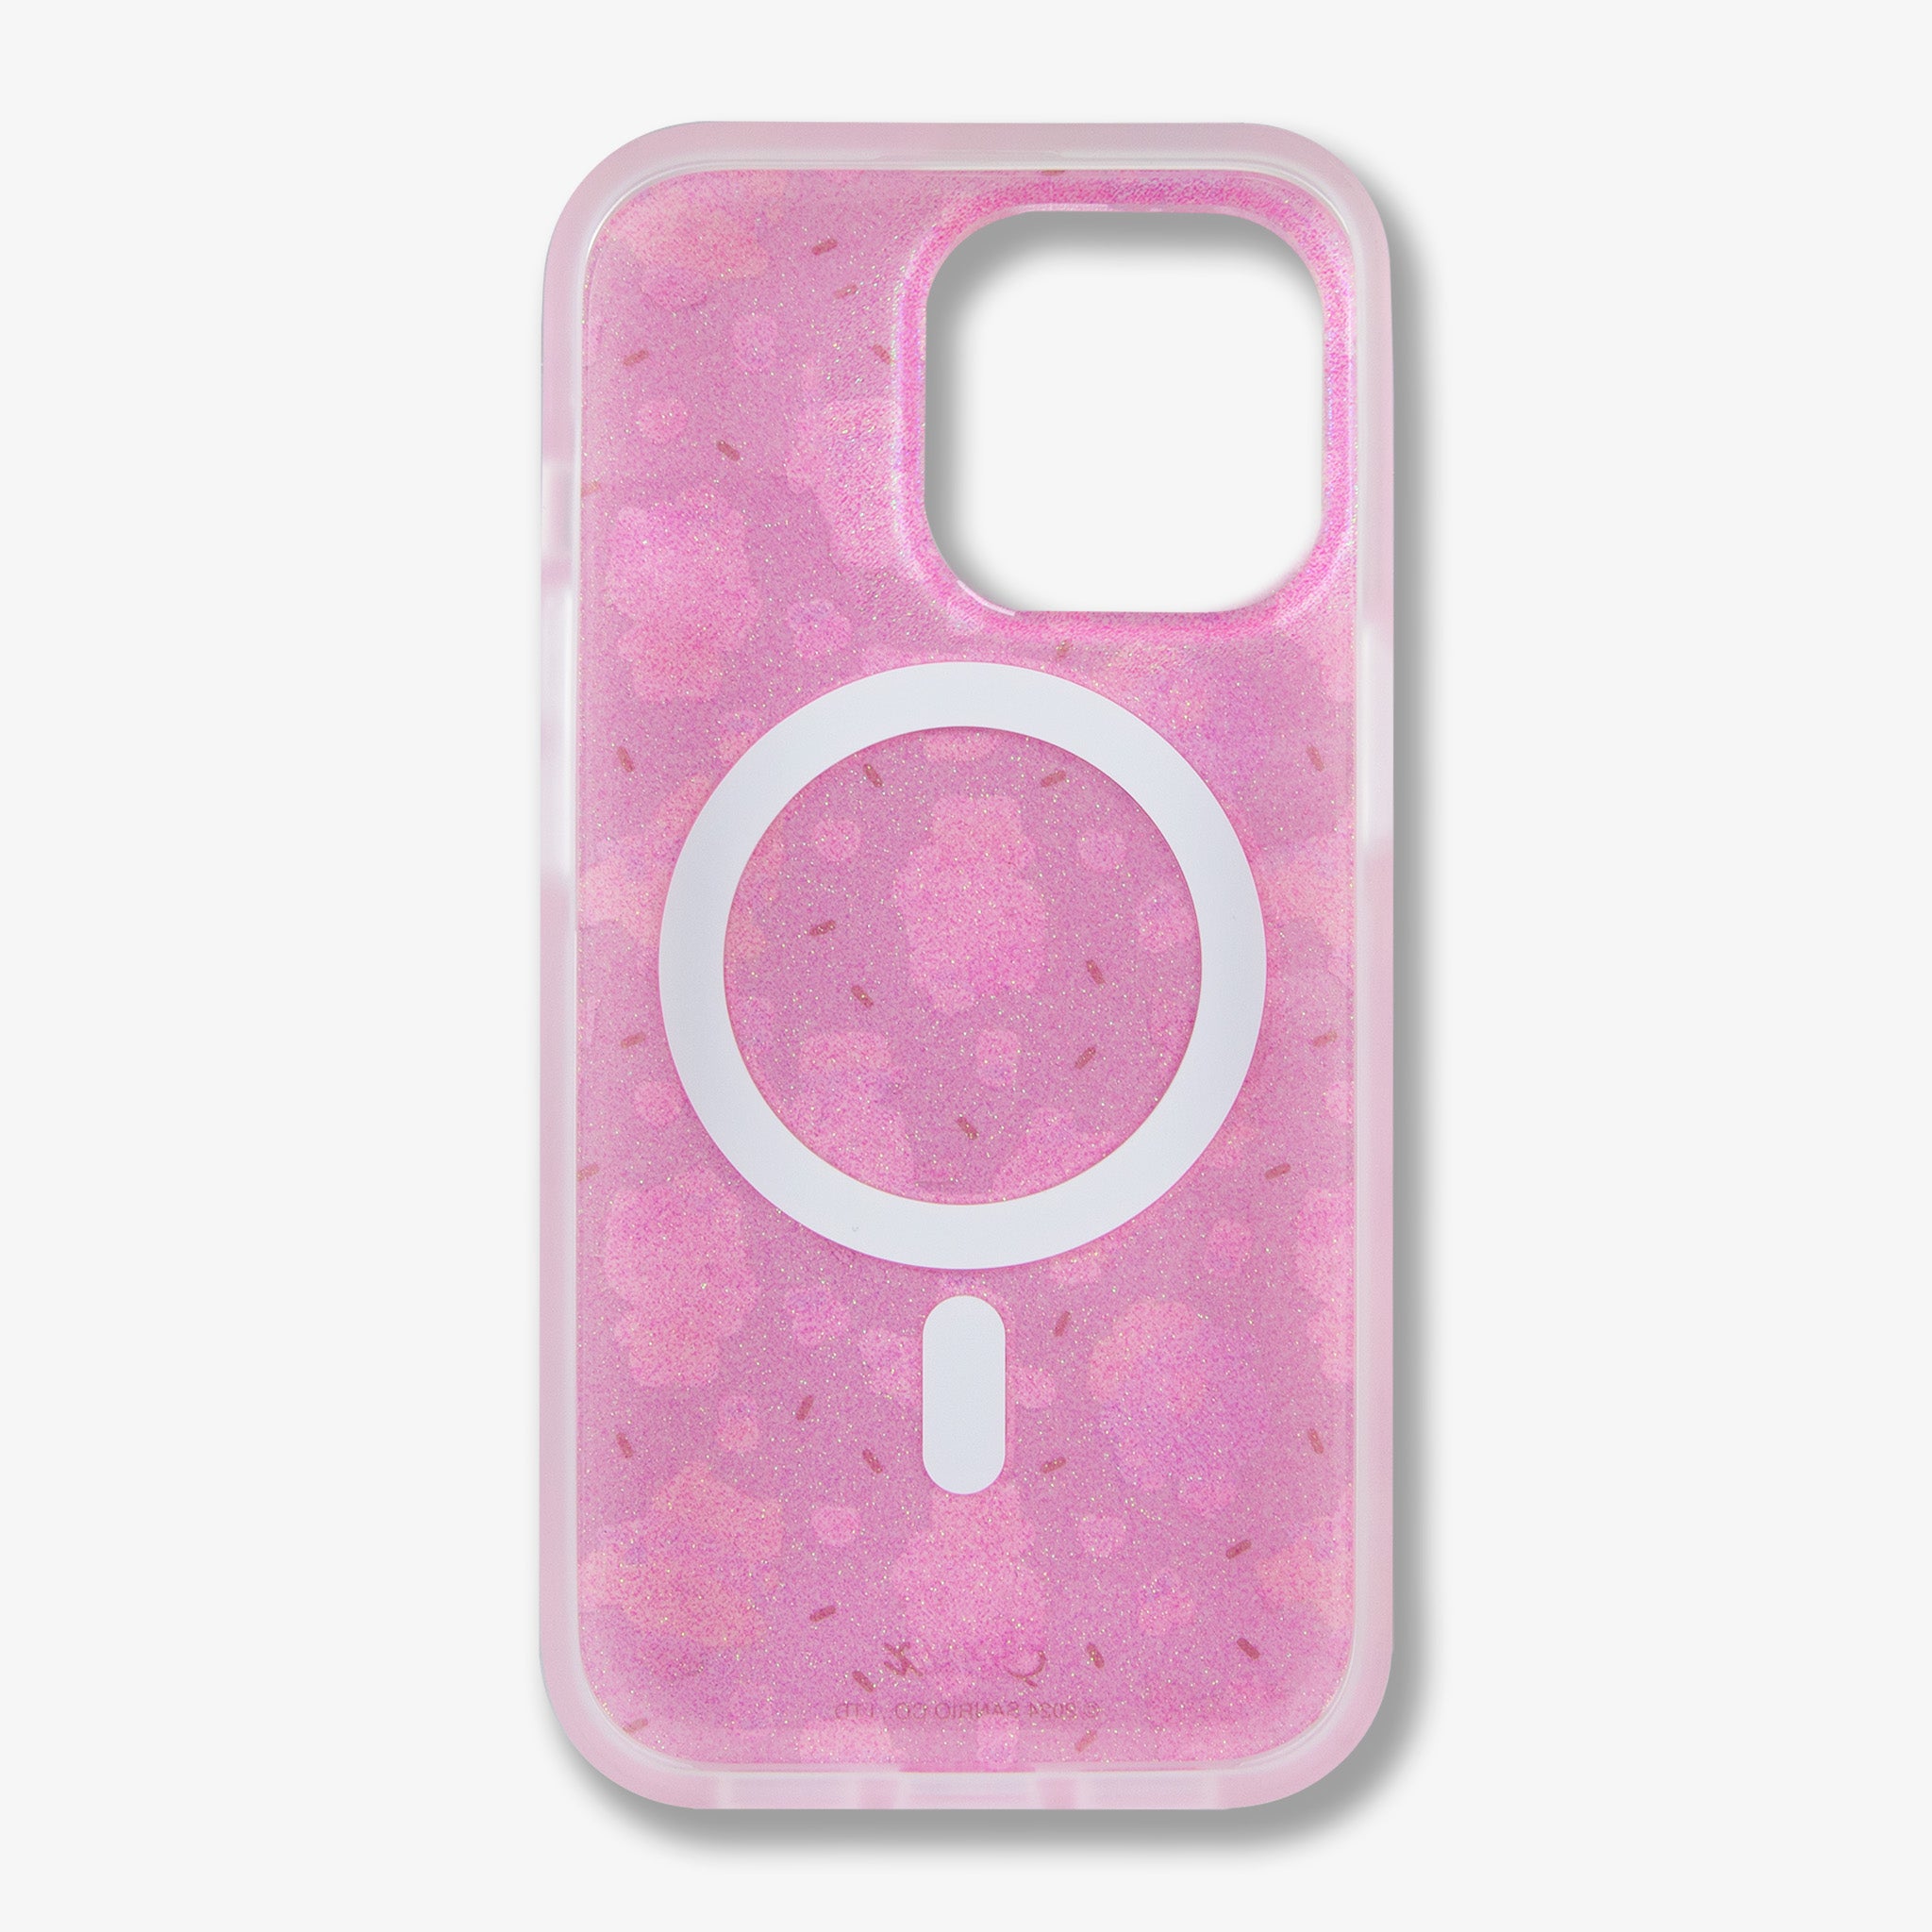 Hello Kitty® and Friends Ice Cream Parlor MagSafe® Compatible iPhone Case